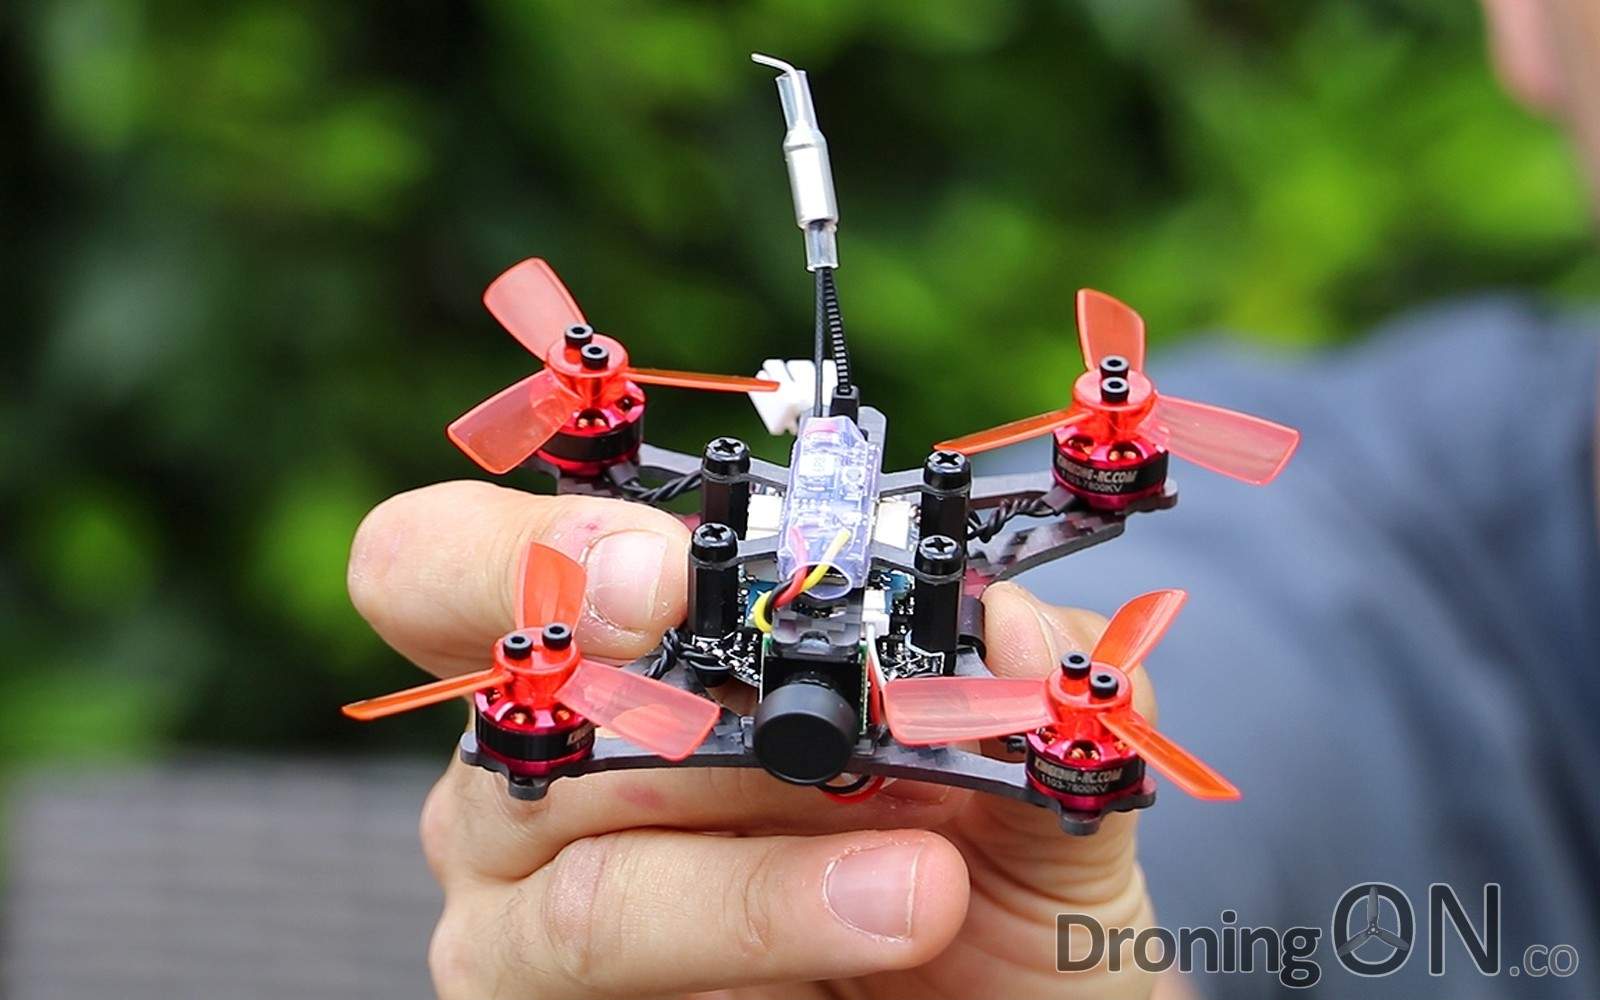 The DroningON review of the new KingKong 90GT Brushless Micro FPV Racer.